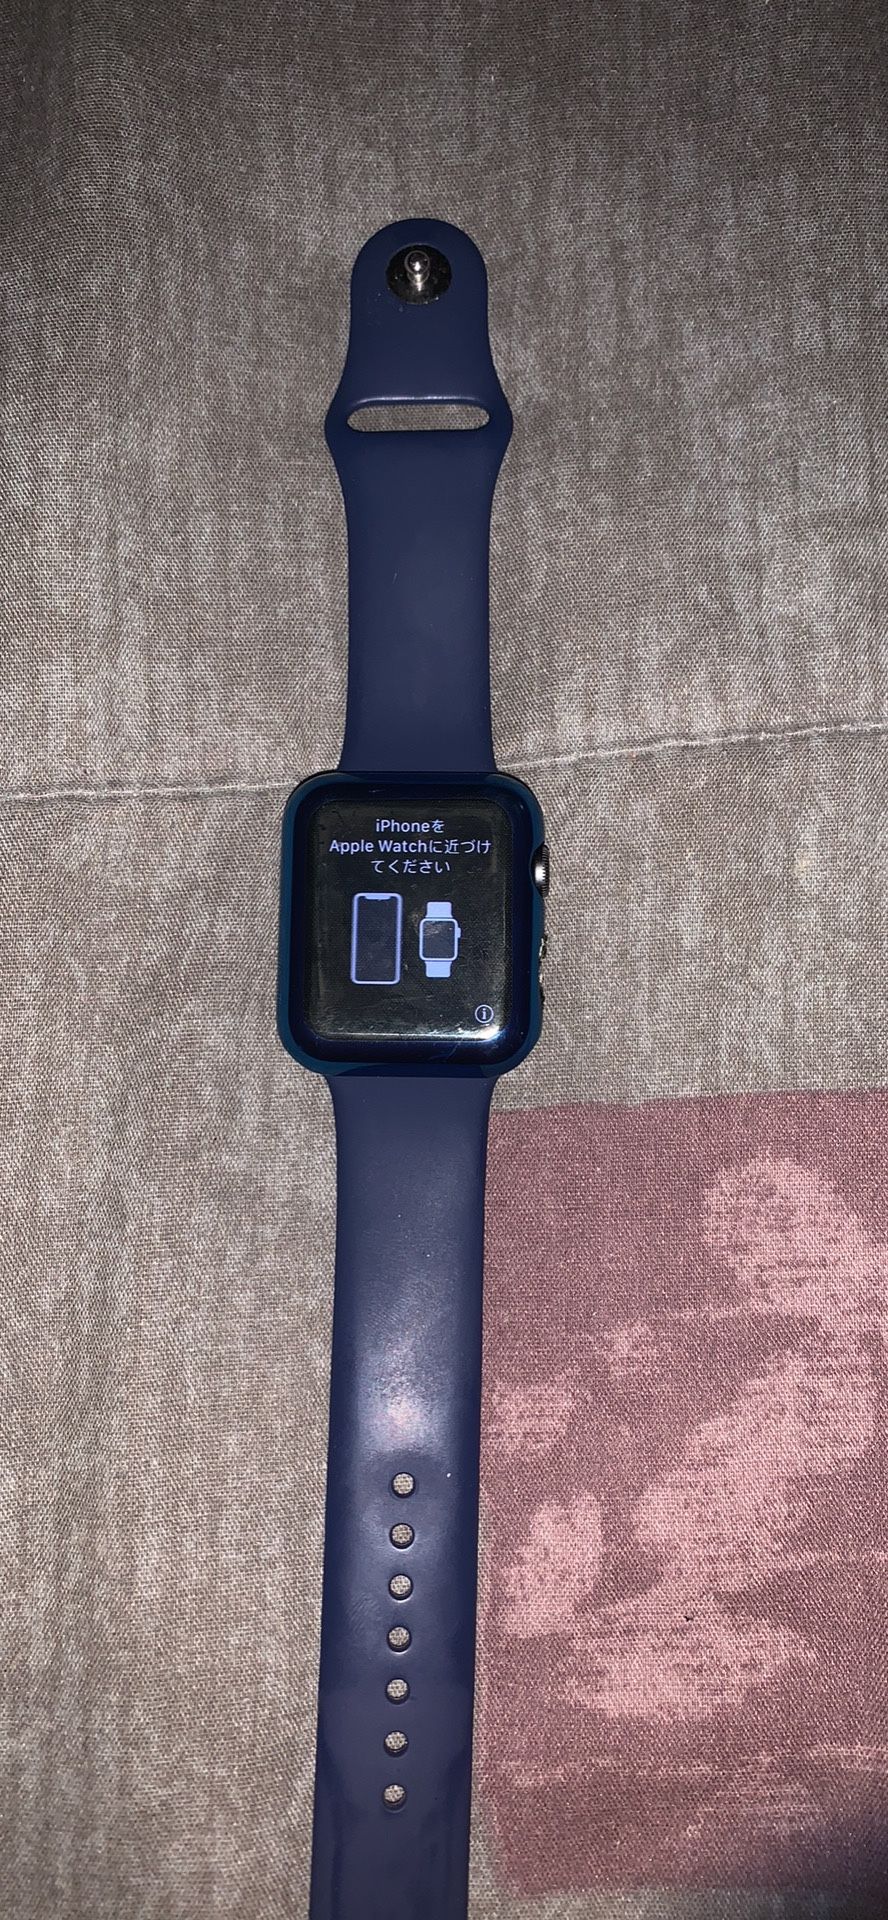 Apple Watch series 3 with gps and cellular